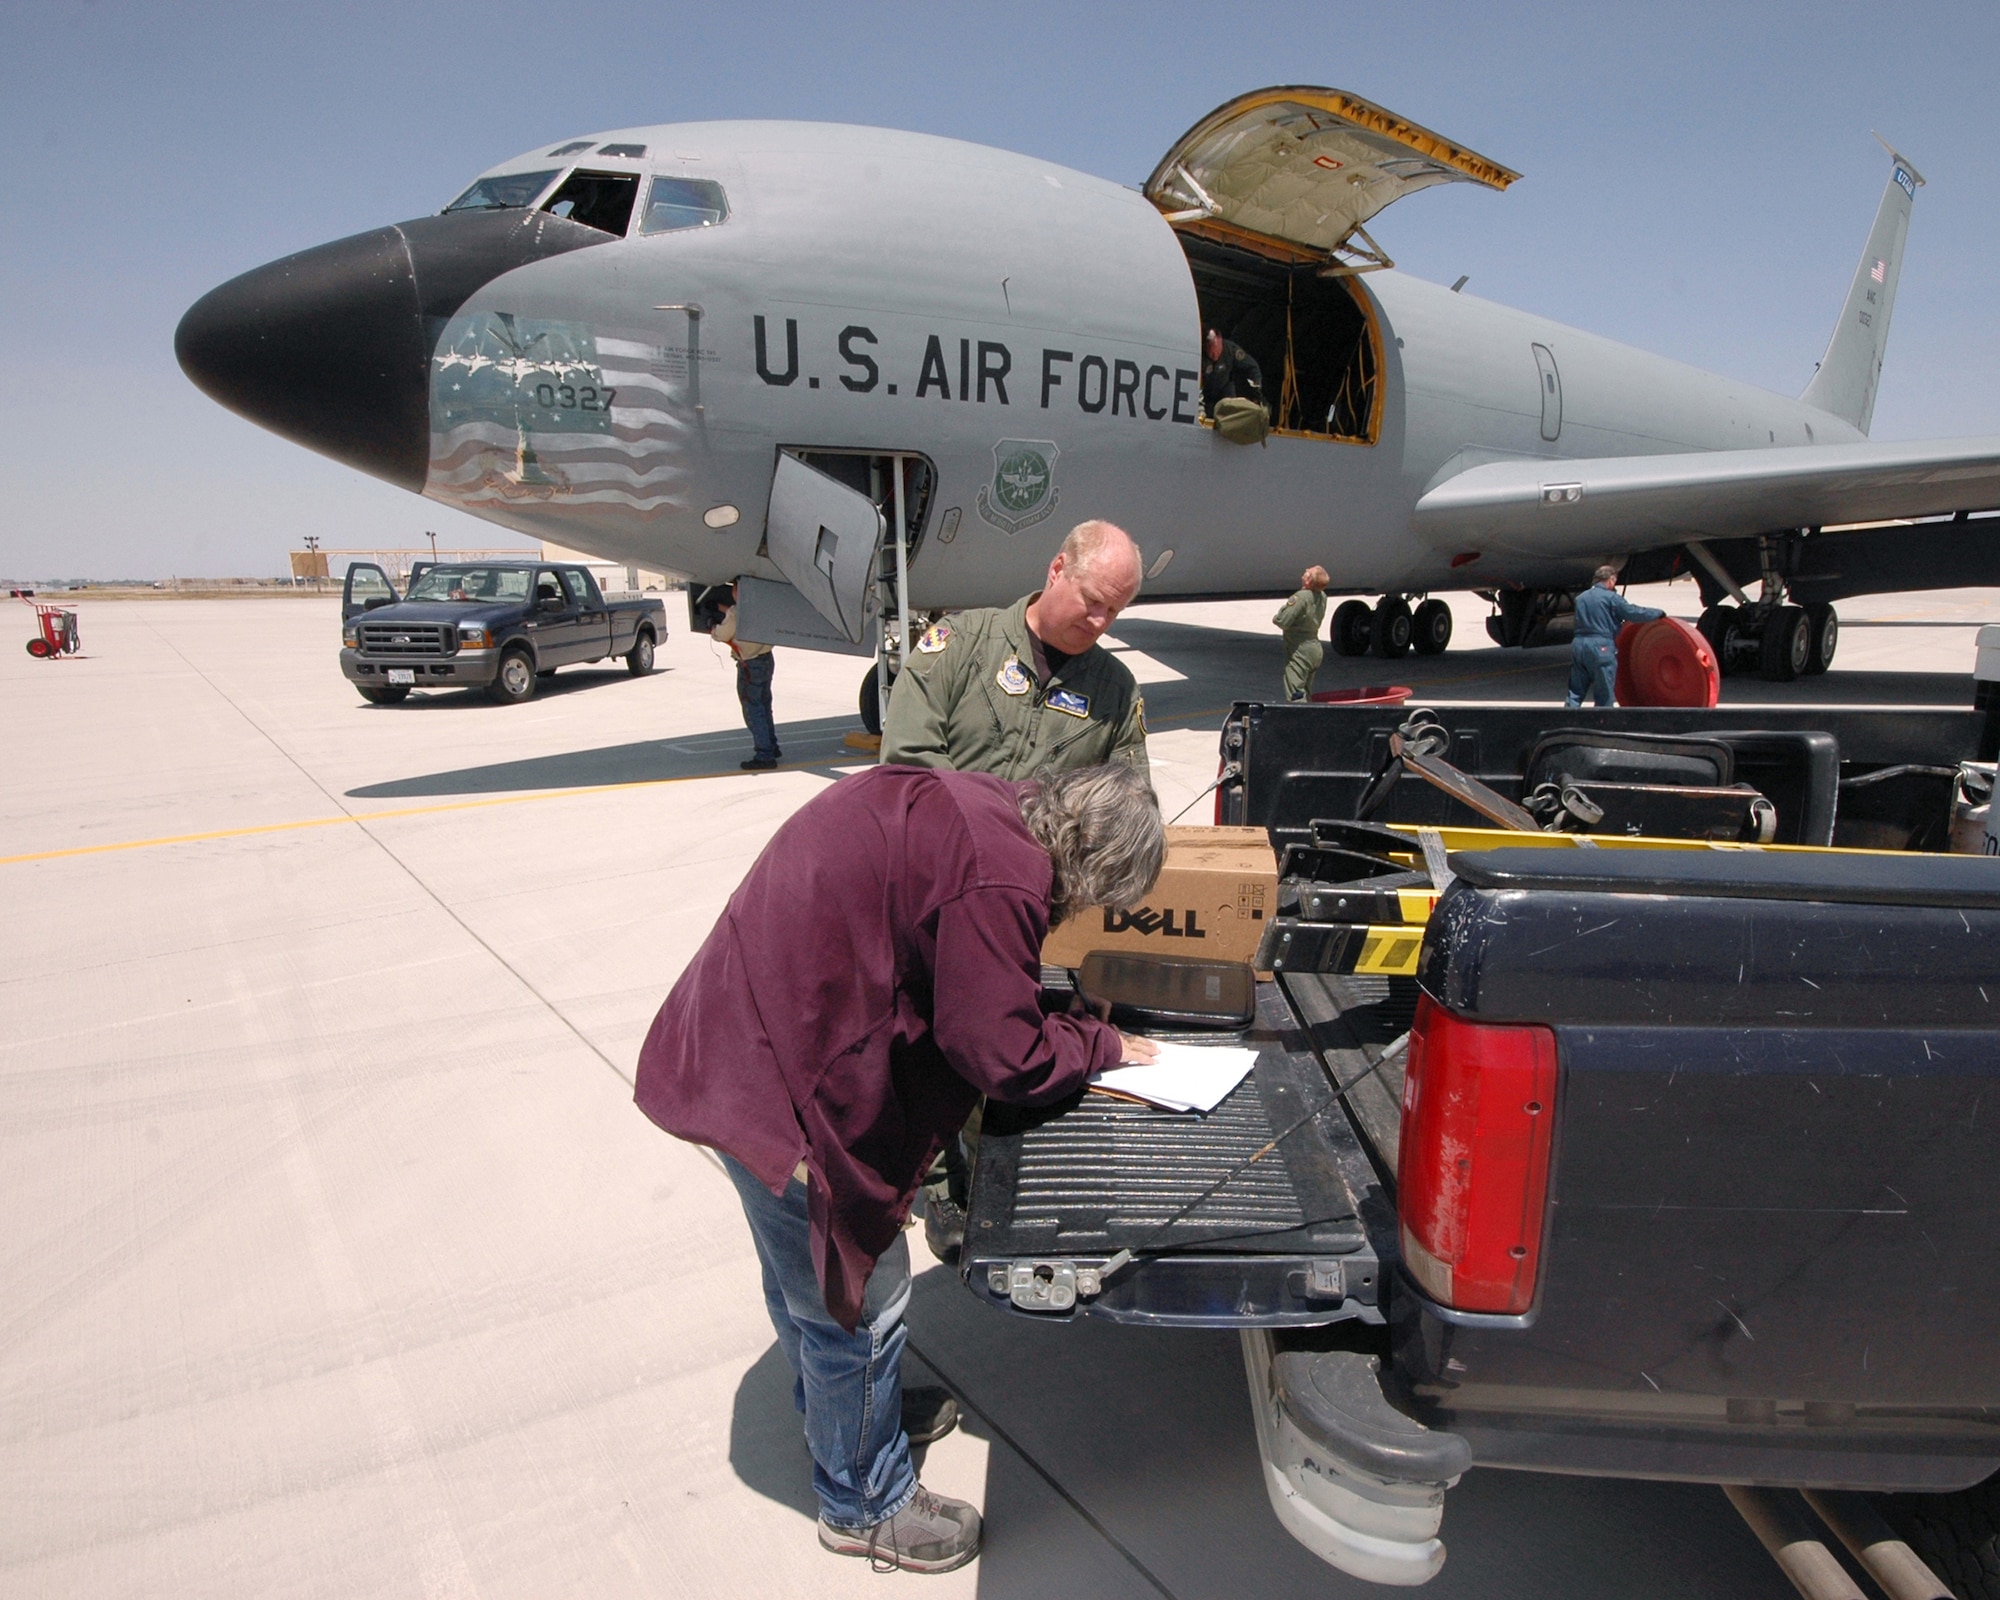 Air Force KC-135 E-model aircraft, tail number 0327, is recieved by 309th Aerospace Maintenance and Regeneration Group personeel at Davis-Monthan Air Force Base on April 24. The 50-year-old aircraft was delivered to the group for long-term storage at the 2,600-acre facility after serving the 151st Air Refueling Wing, Utah Air National Guard for more than 20 years. The 309th AMARG is a one-of-a-kind specialized facility within the Air Force Materiel Command's 309th Maintenance Wing at Hill AFB, Utah. The 309th AMARG provides critical aerospace maintenance and regeneration capabilities for Joint and Allied/Coalition warfighters in support of global operations and agile combat support for a wide range of military operations. U.S. Air Force photo by: Master Sgt. Burke Baker